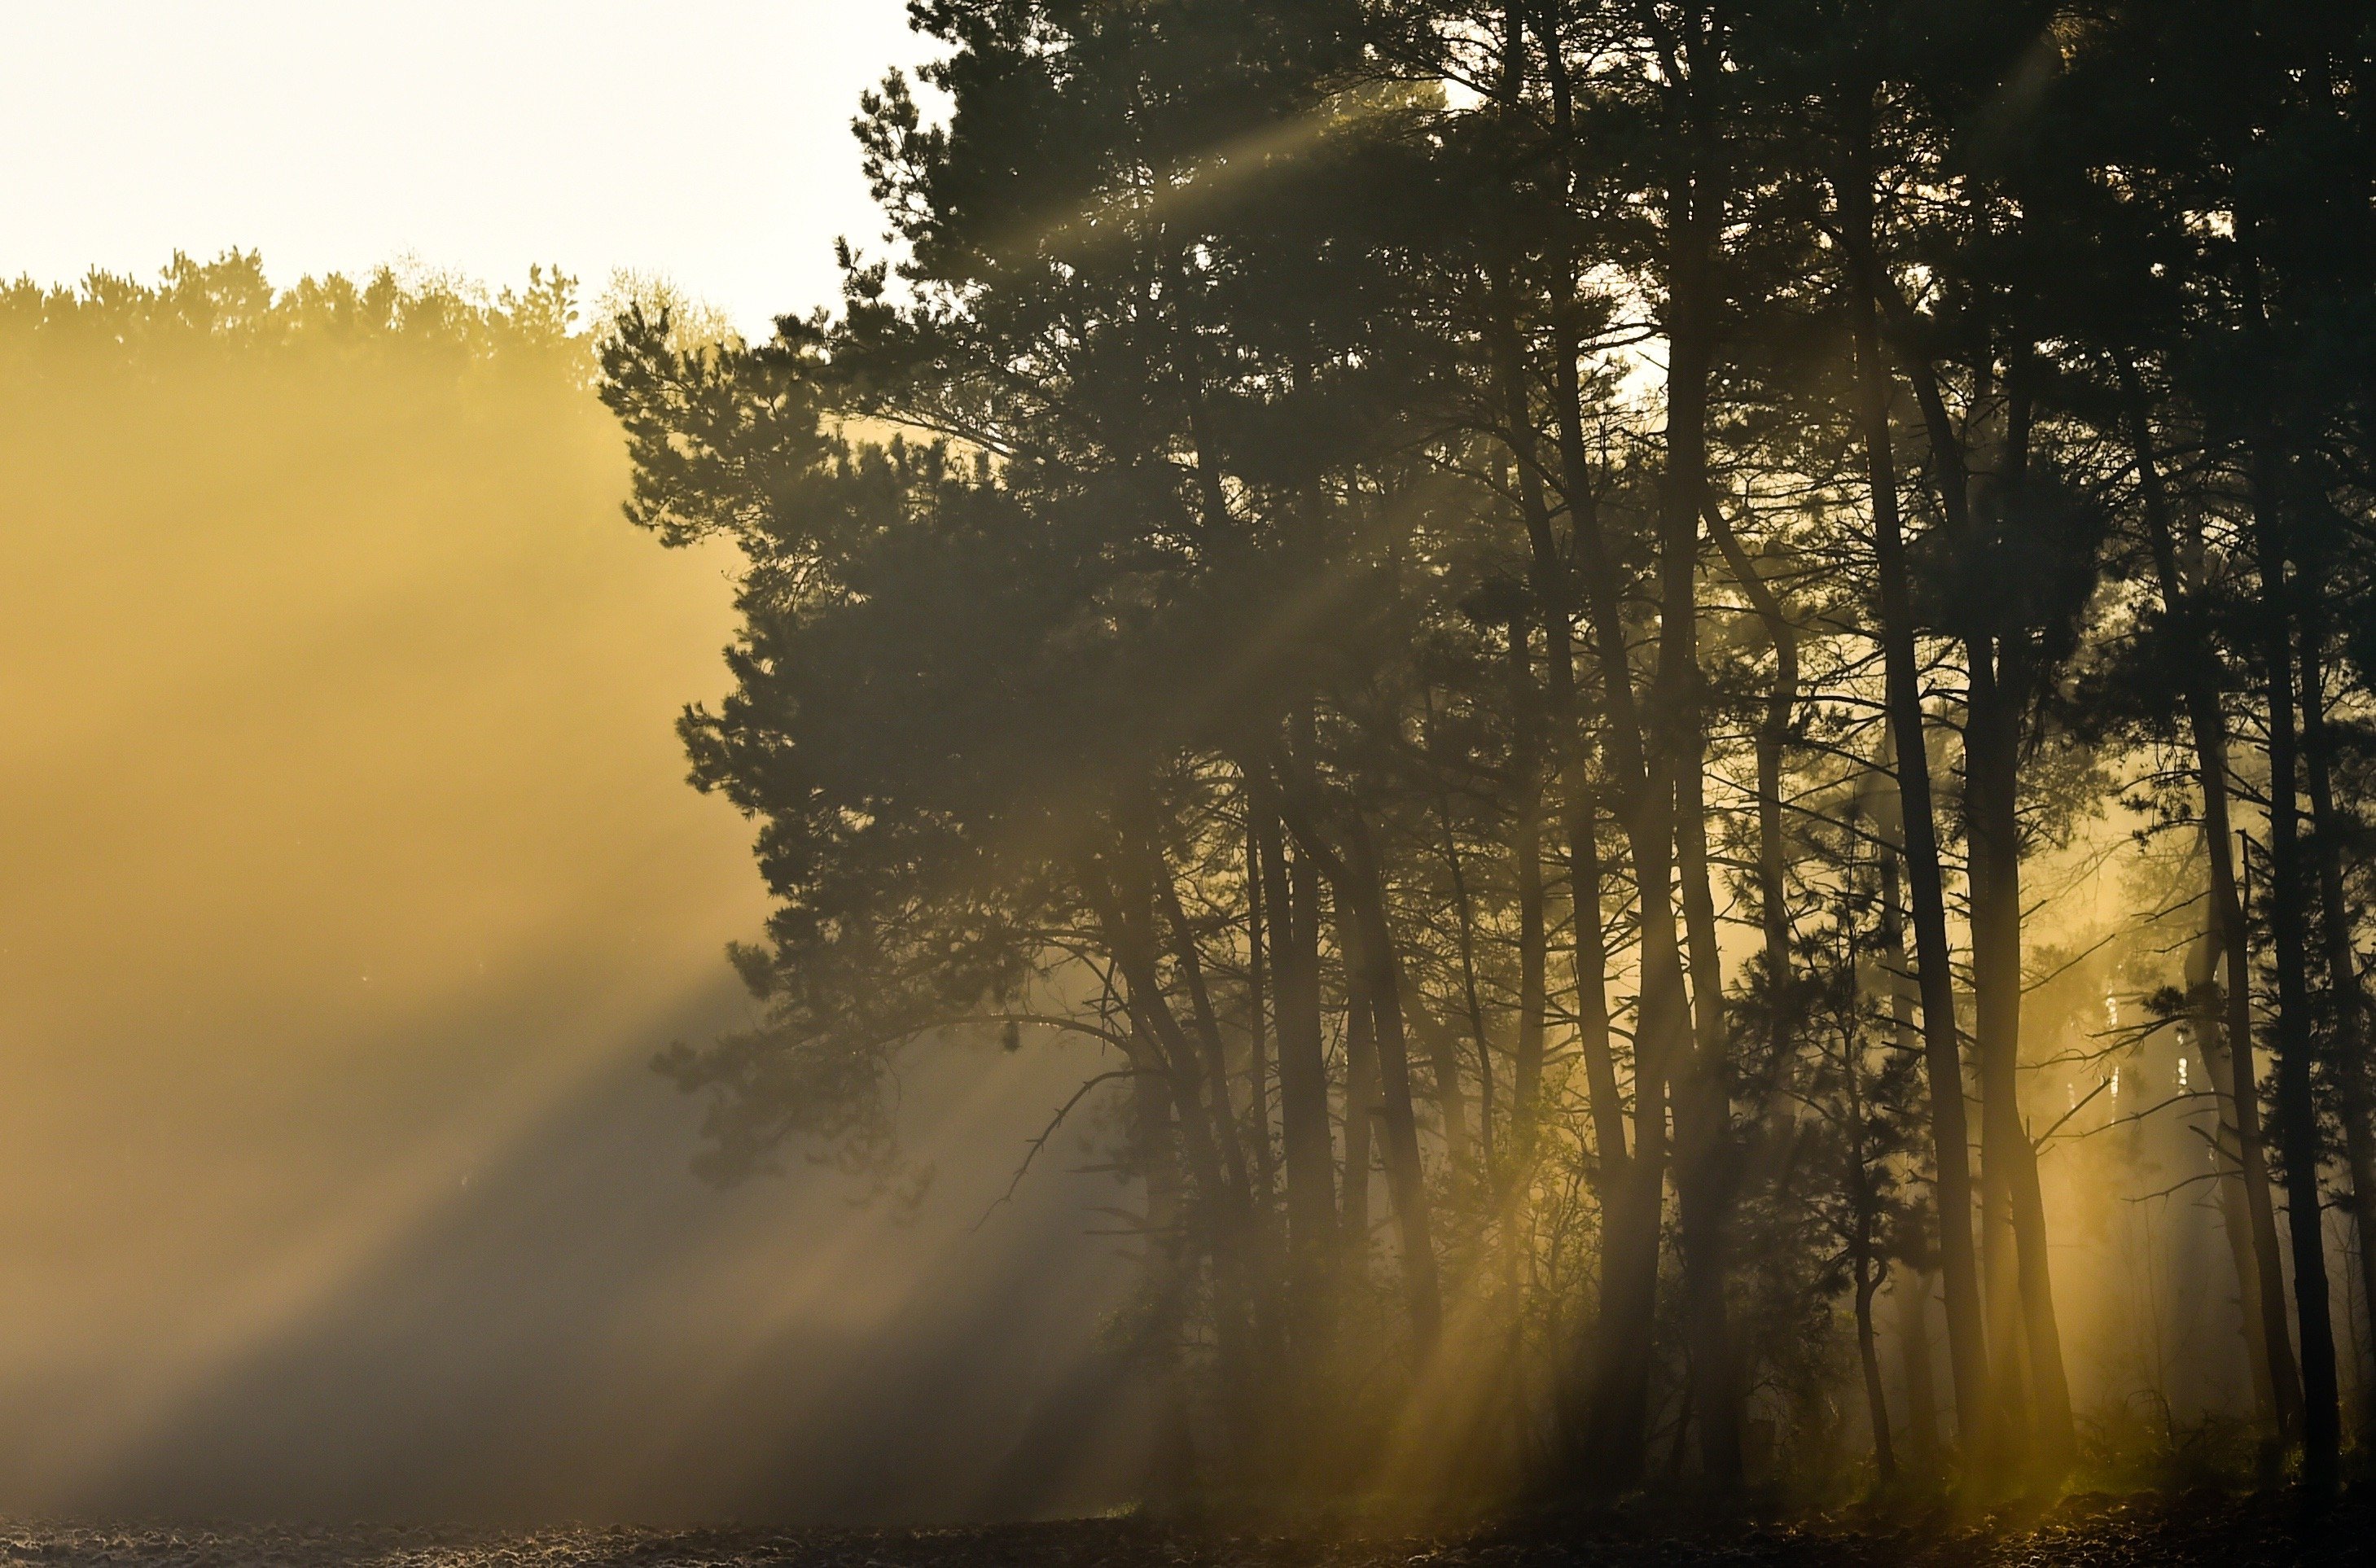 Apr. 11, 2014. The sun shines through the early morning fog behind a group of trees near Frankfurt/Oder, Germany.